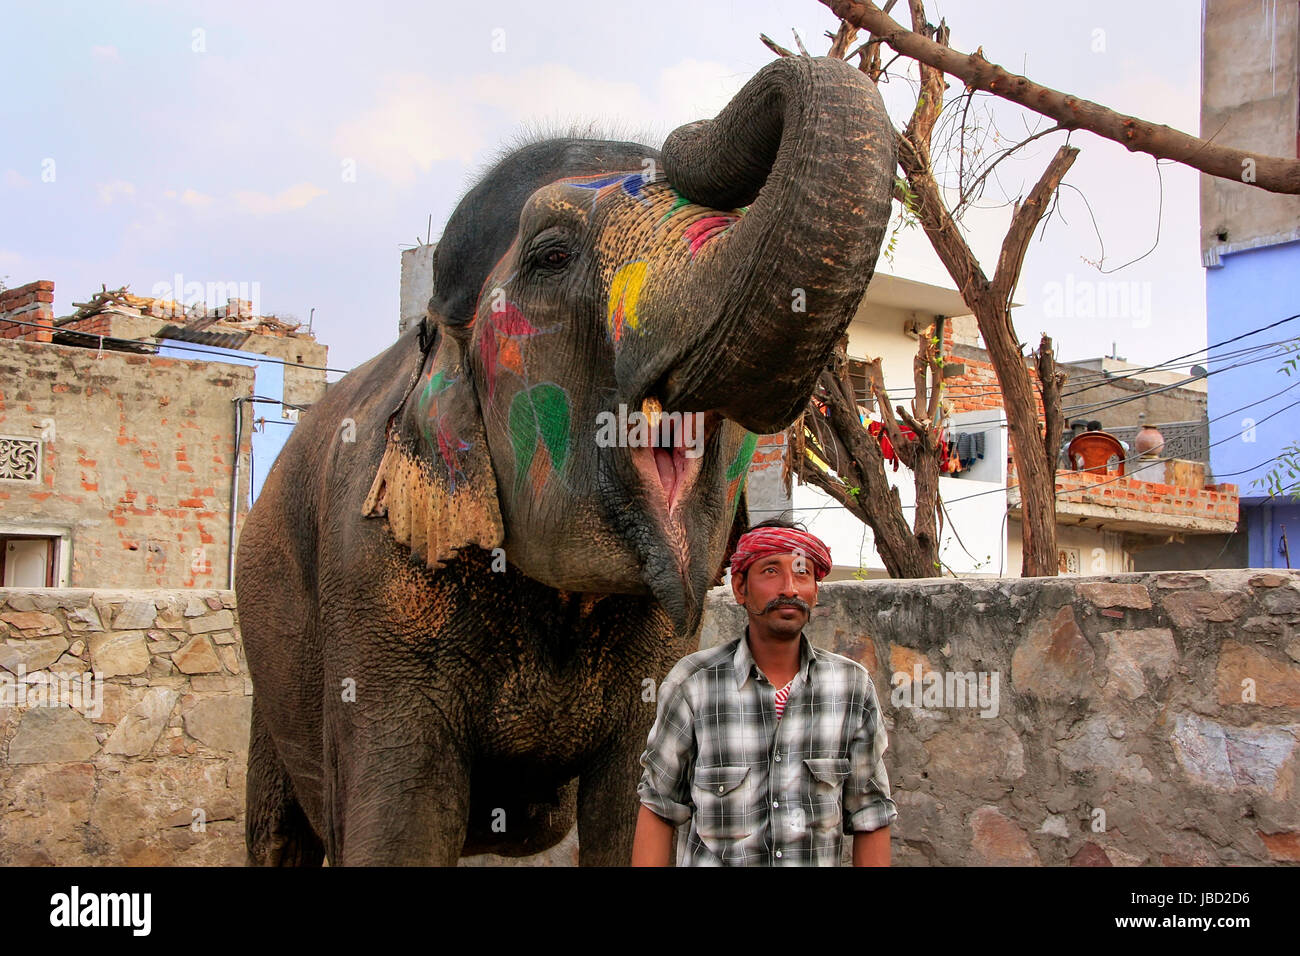 Mahout standing with painted elephant at small elephant quarters in Jaipur, Rajasthan, India. Elephants are used for rides and other tourist activitie Stock Photo